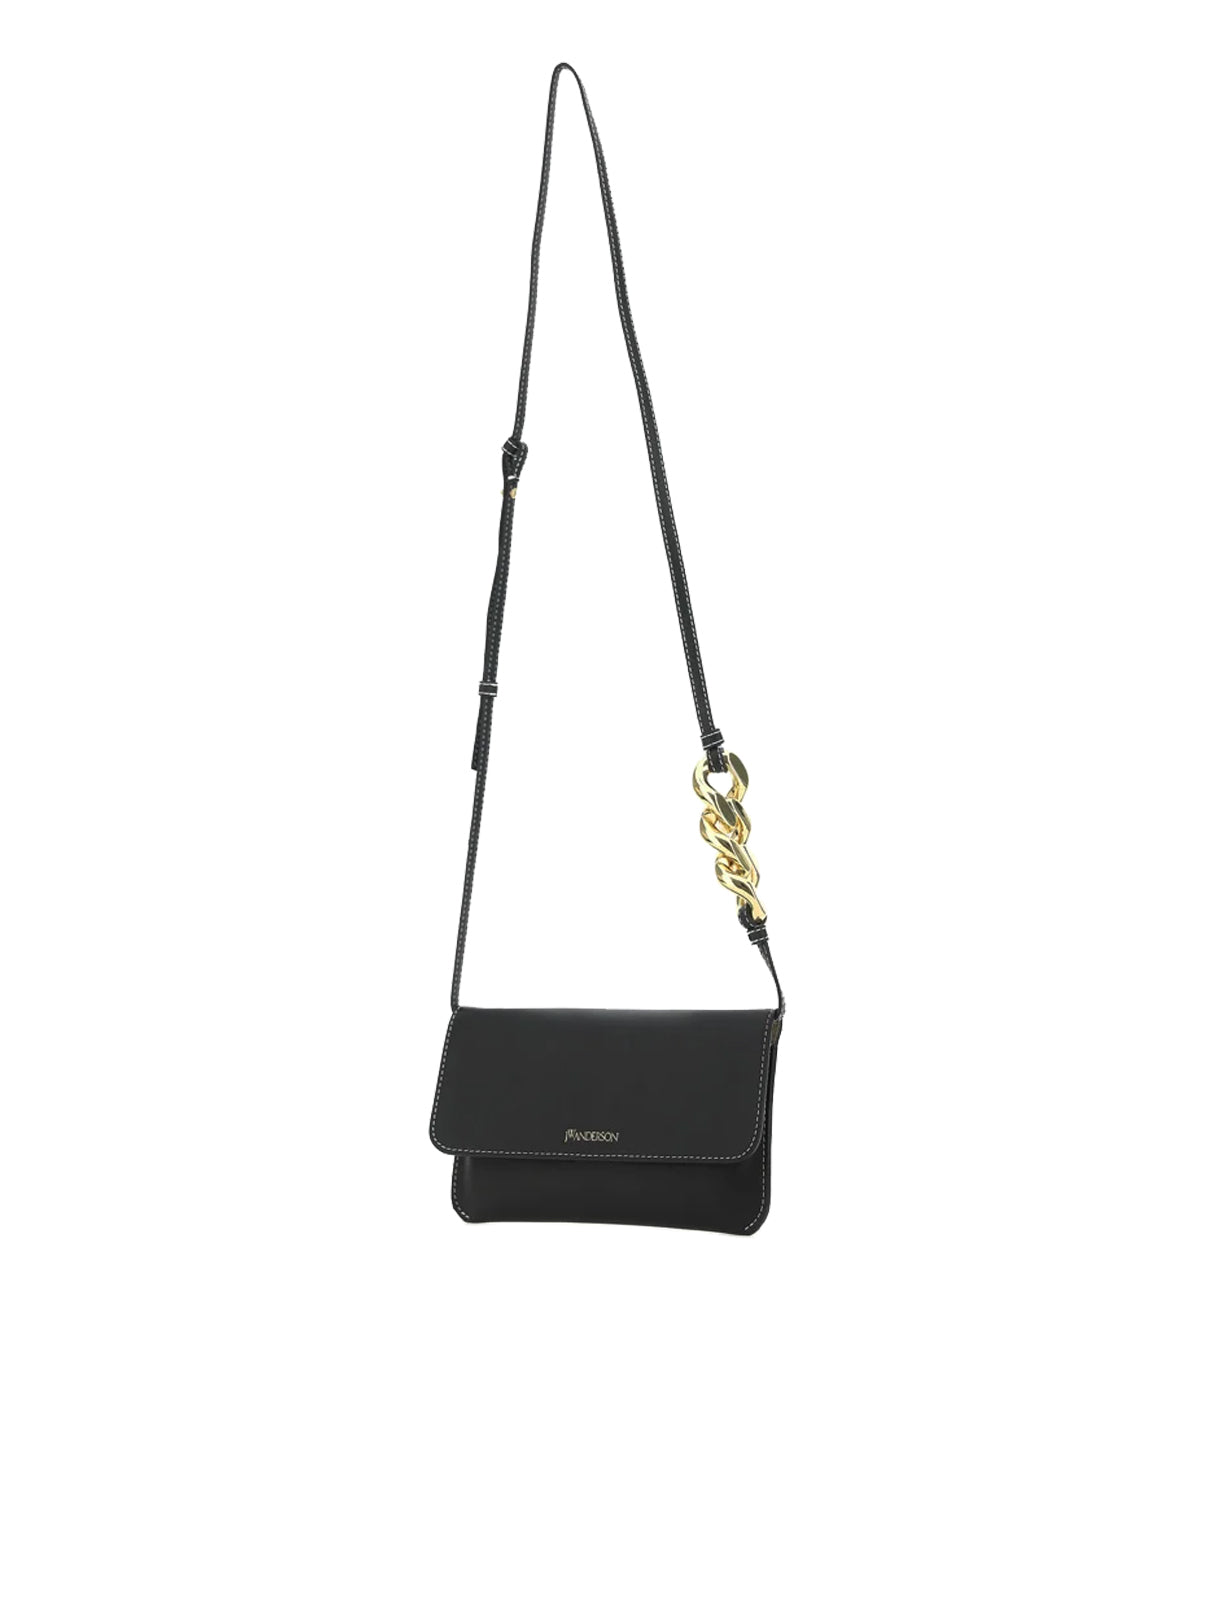 JW ANDERSON BLACK FOLD OVER PHONE POUCH CROSSBODY BAG